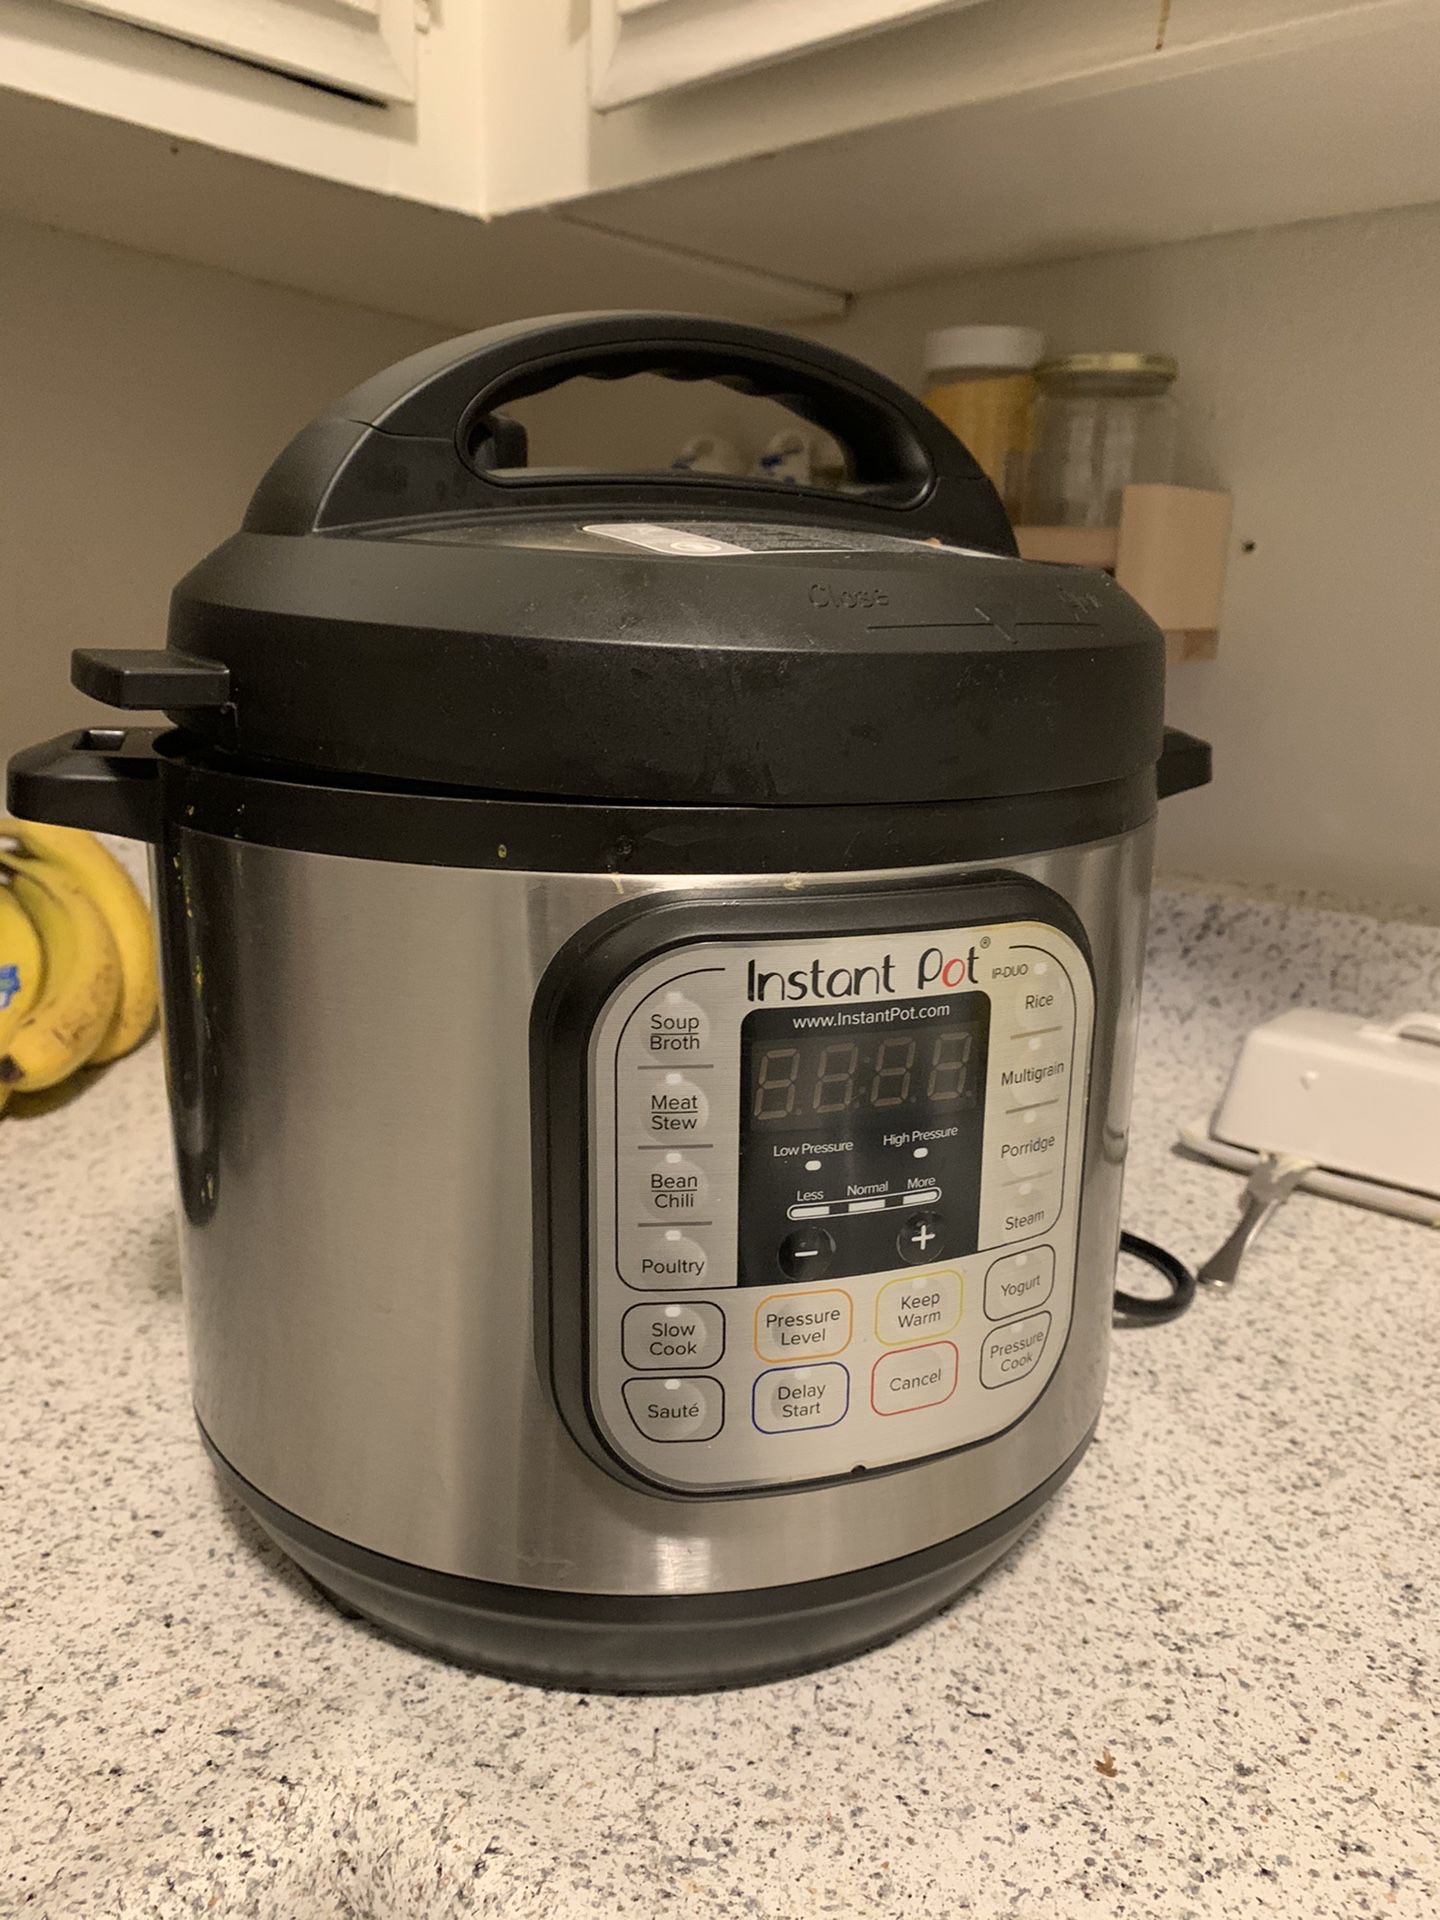 Instant Pot Pressure Cooker - Barely Used